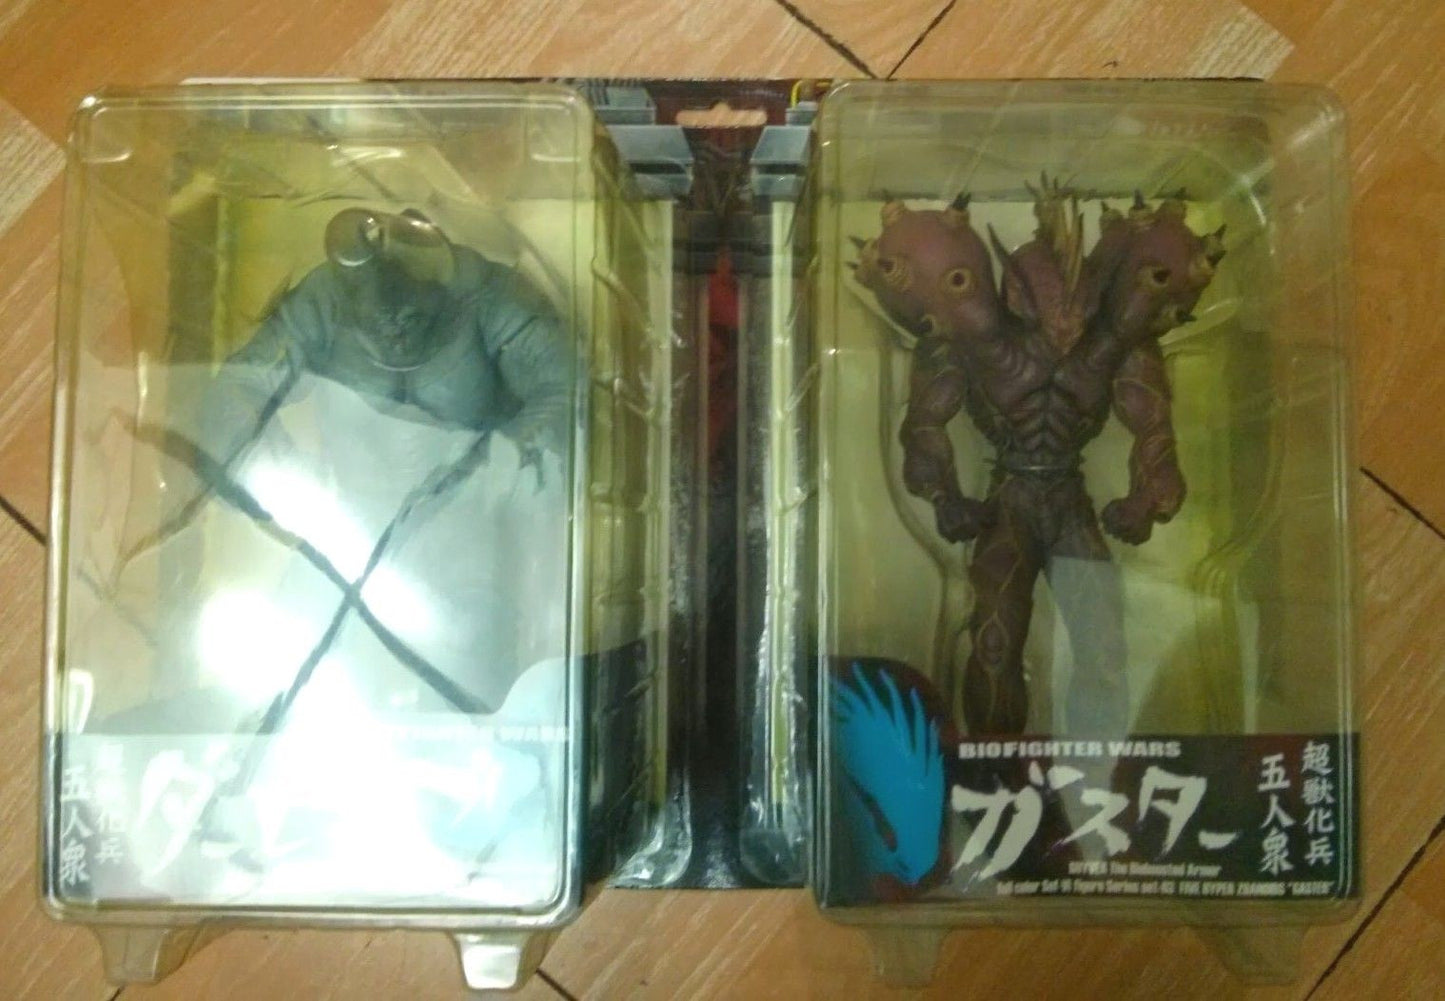 Max Factory Guyver BFC Bio Fighter Wars Collection 03 Max Neo Derzerb Gaster Figure - Lavits Figure
 - 1